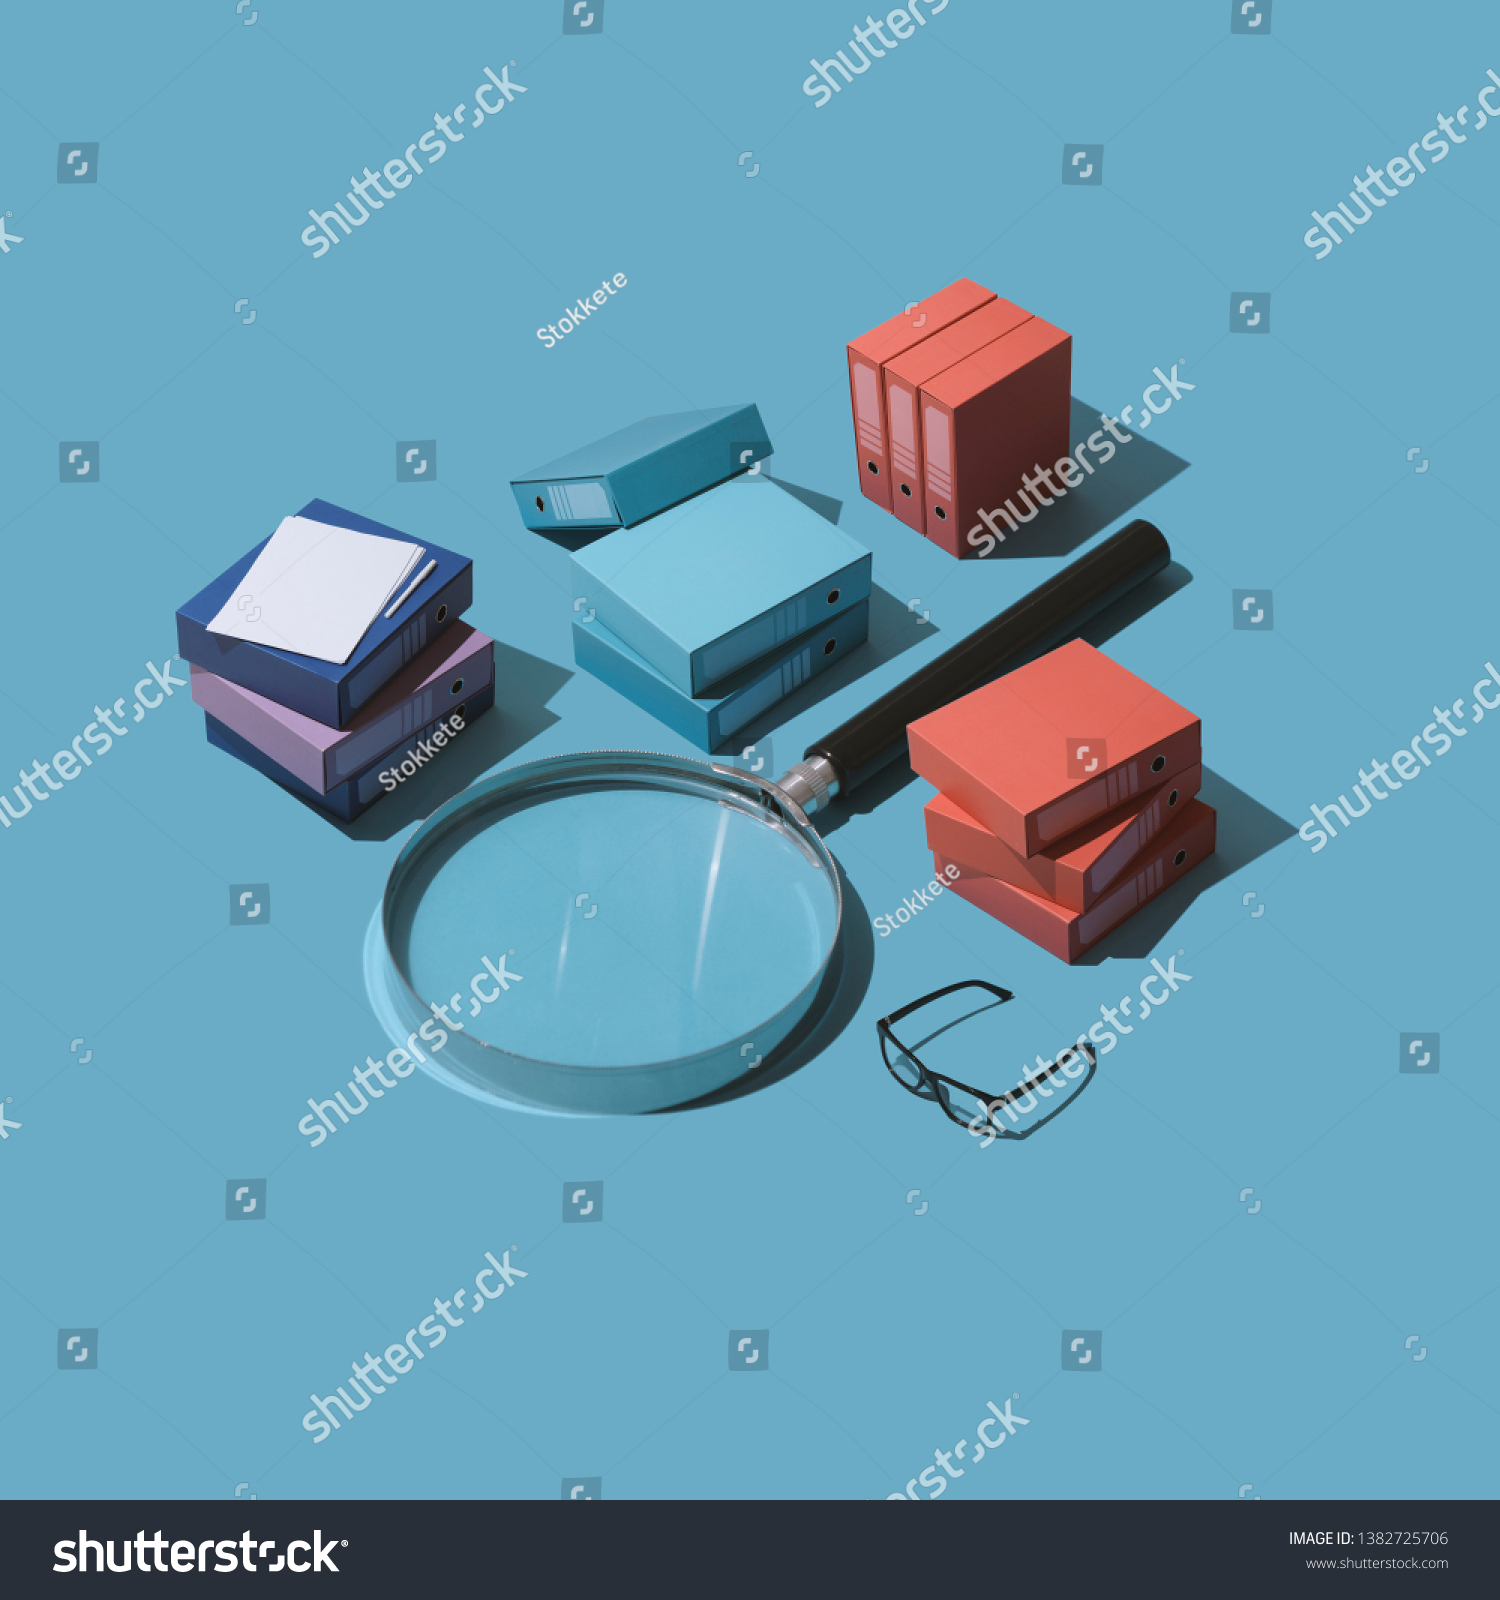 Database and archive management: big magnifying glass and piles of folders, isometric objects #1382725706